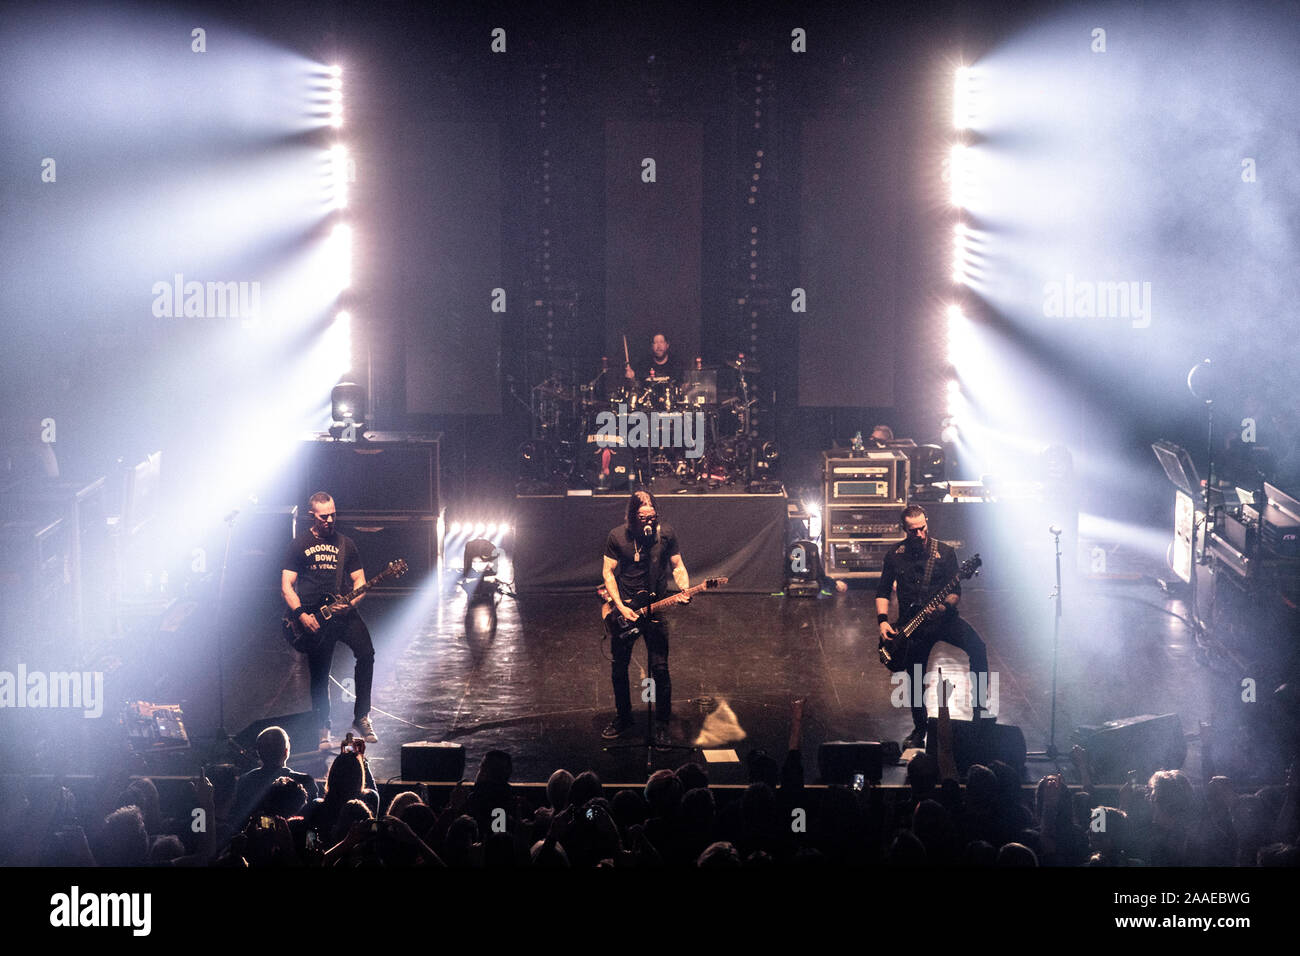 Oslo, Norway. 17th, November 2019. The American hard rock band Alter Bridge performs a live concert at Sentrum Scene in Oslo. Here guitarist and singer Myles Kennedy is seen live on stage with guitarist Mark Tremonti (R), bass player Brian Marshall (L) and drummer Scott Phillips. (Photo credit: Gonzales Photo - Terje Dokken). Stock Photo